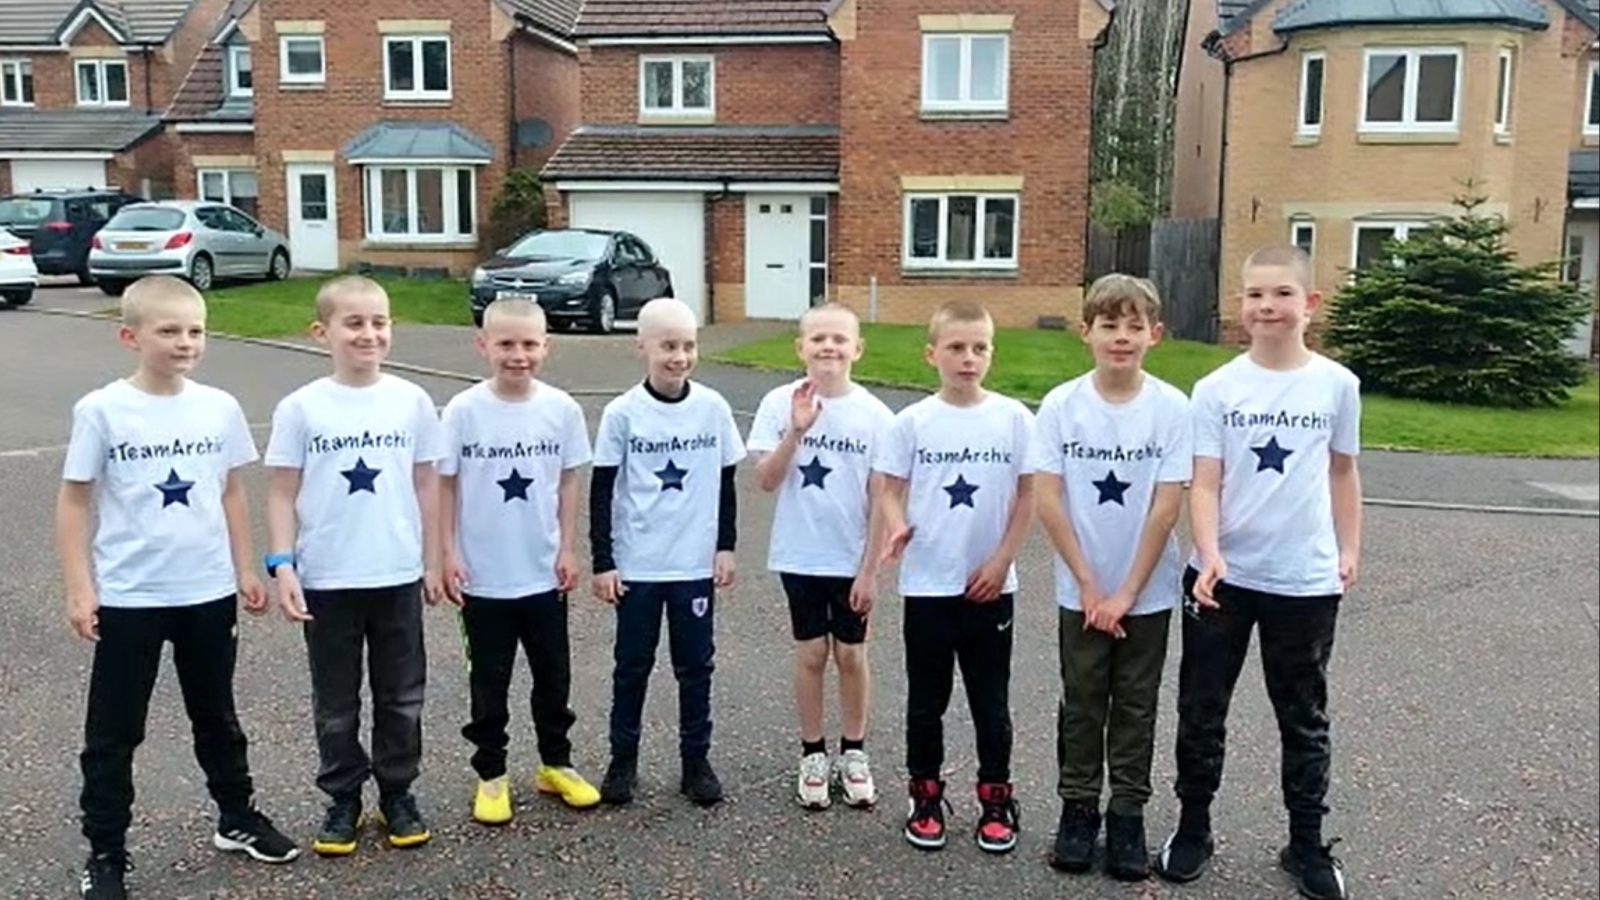 Archie and his friends in #TeamArchie t-shirts